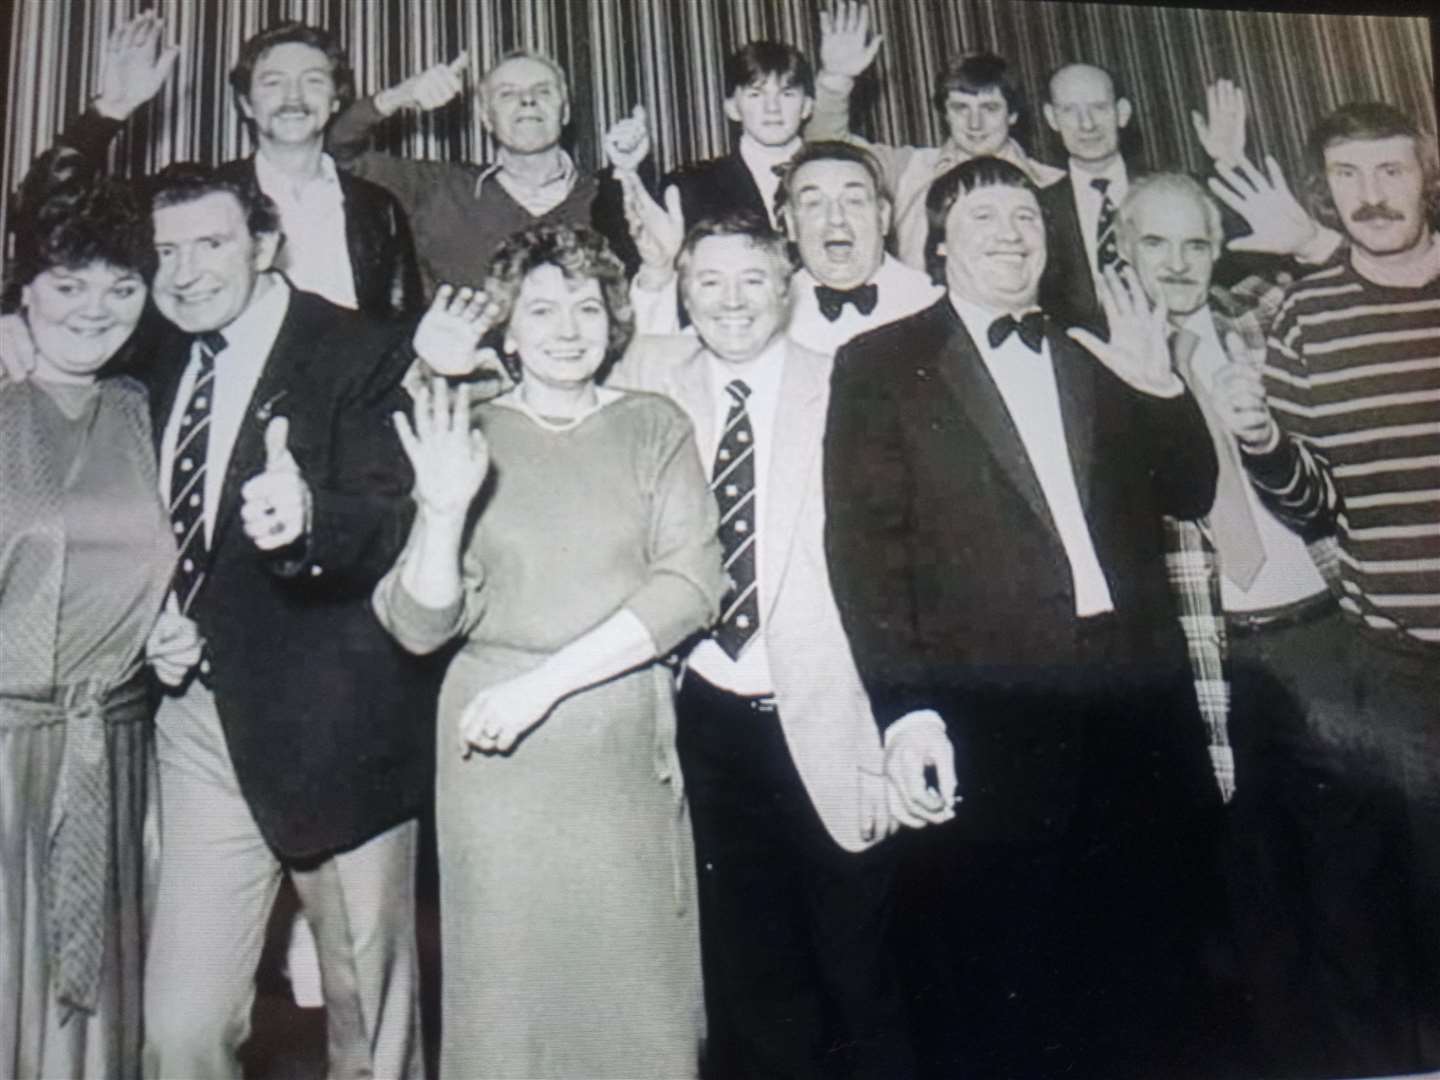 Tombo Tolmie, pictured in middle with black bow tie, with cast of the Merkinch production of Cinderbella with Billy Nelson.